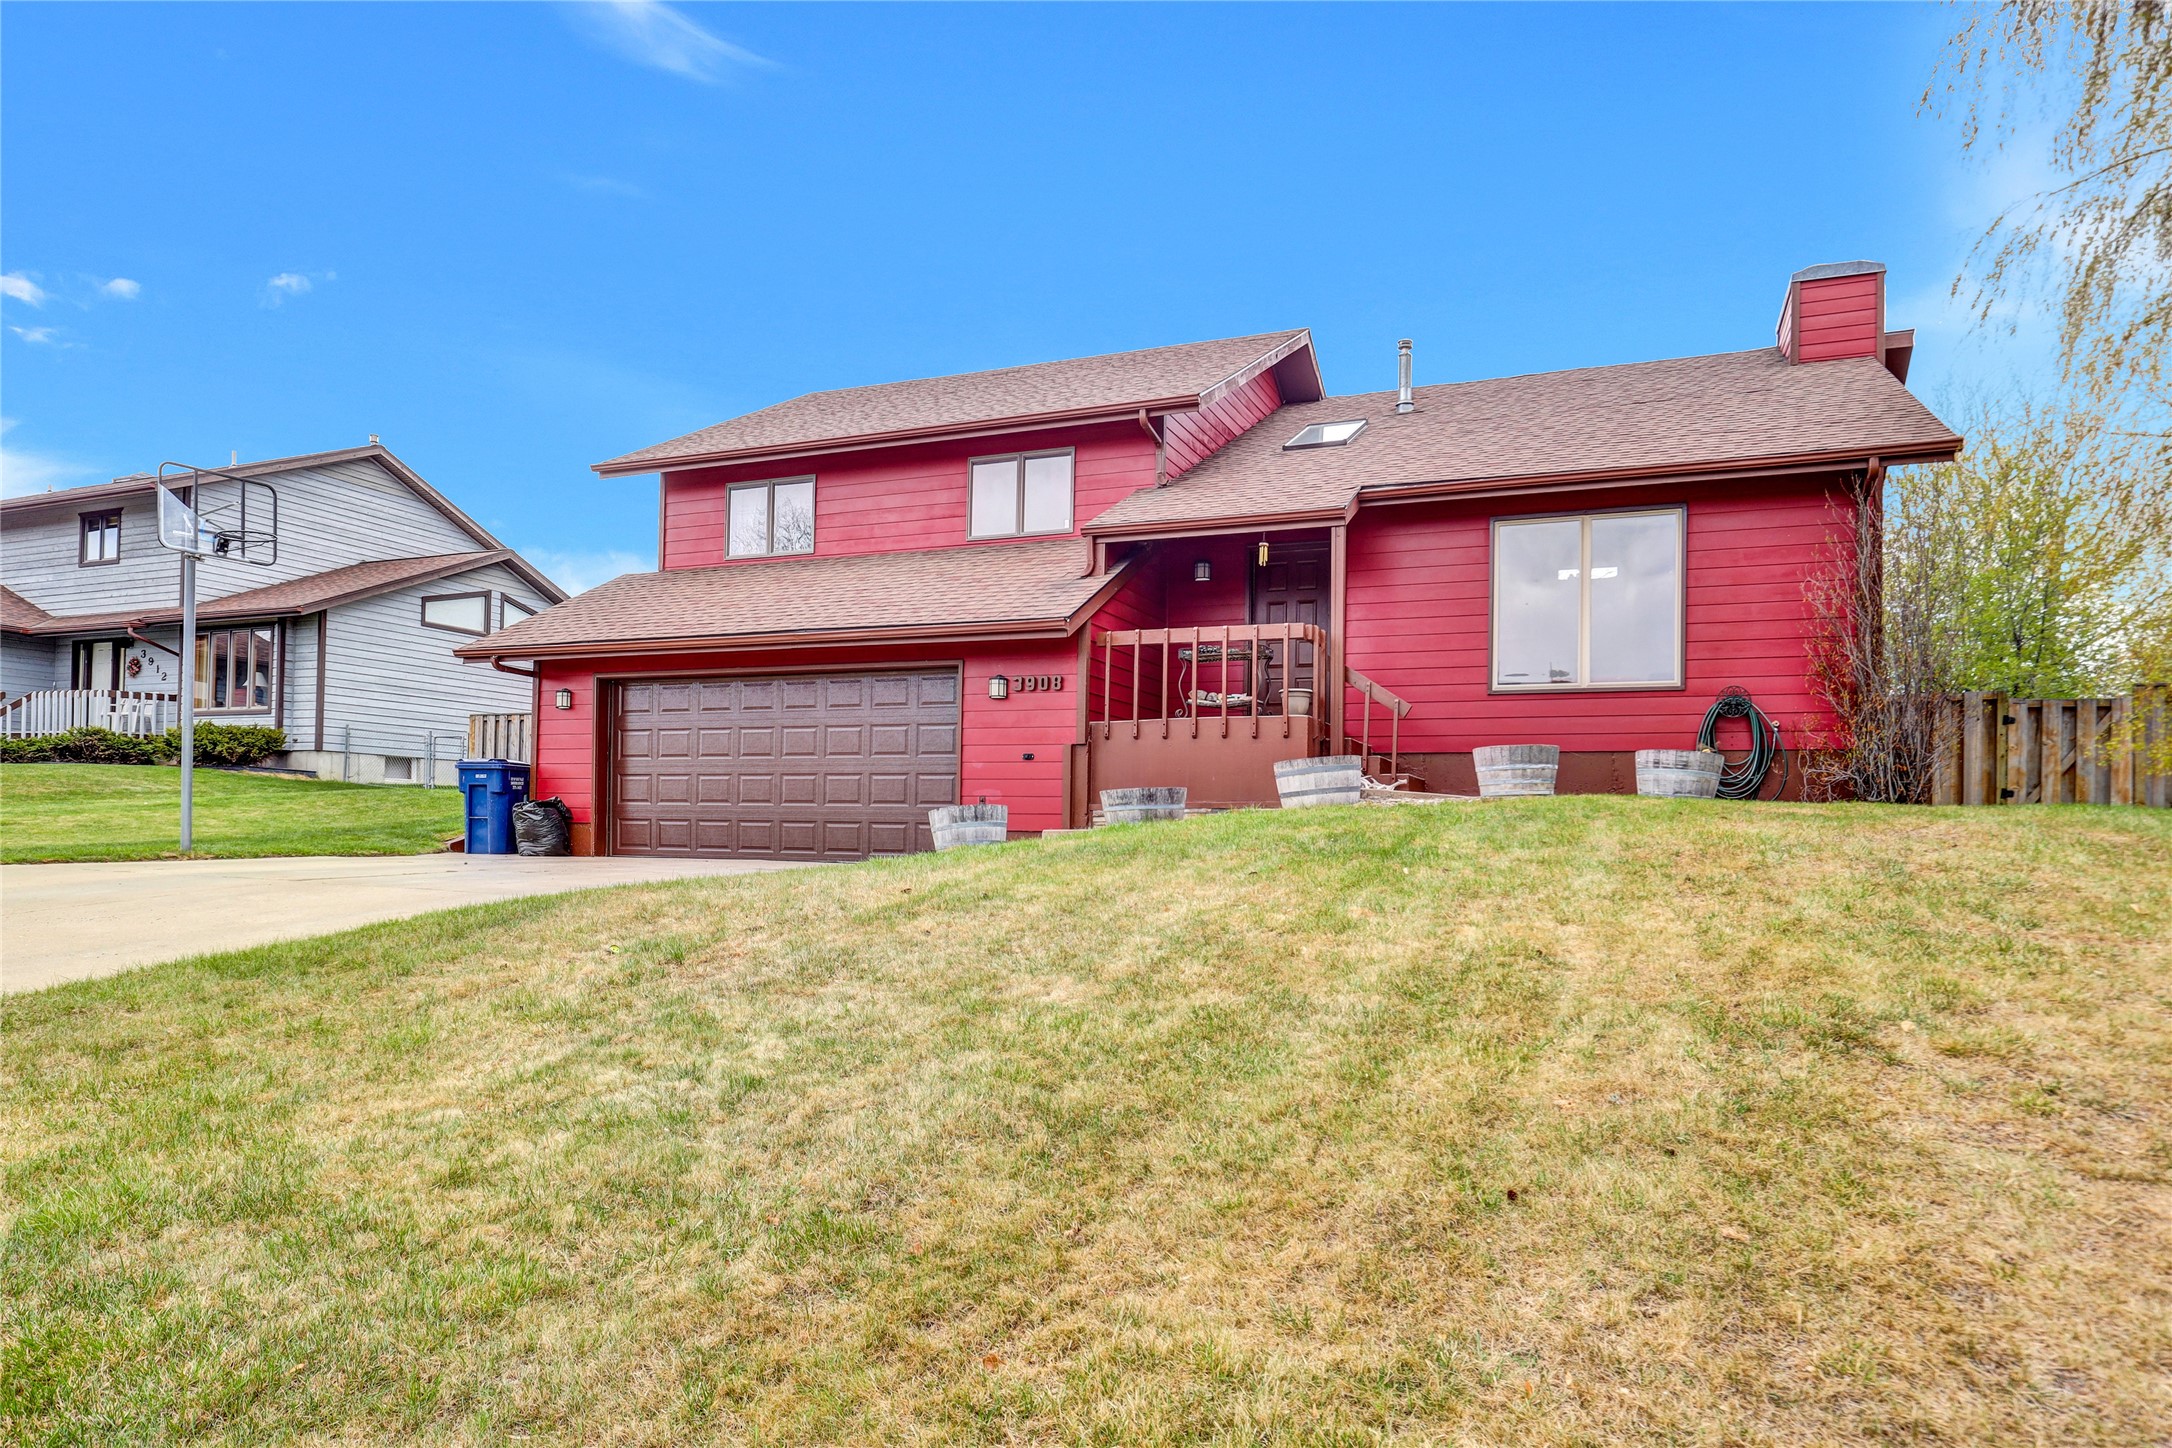 Great Christianson Addition home. 4 beds 3 baths 2 car garage. Central AC, large trex deck over looking the large back yard. Master bedroom and bath, vaulted ceilings, lots of windows for great natural light. Priced to move. Call Jim Dea at 406 231 1830 or your real estate professional for a showing.